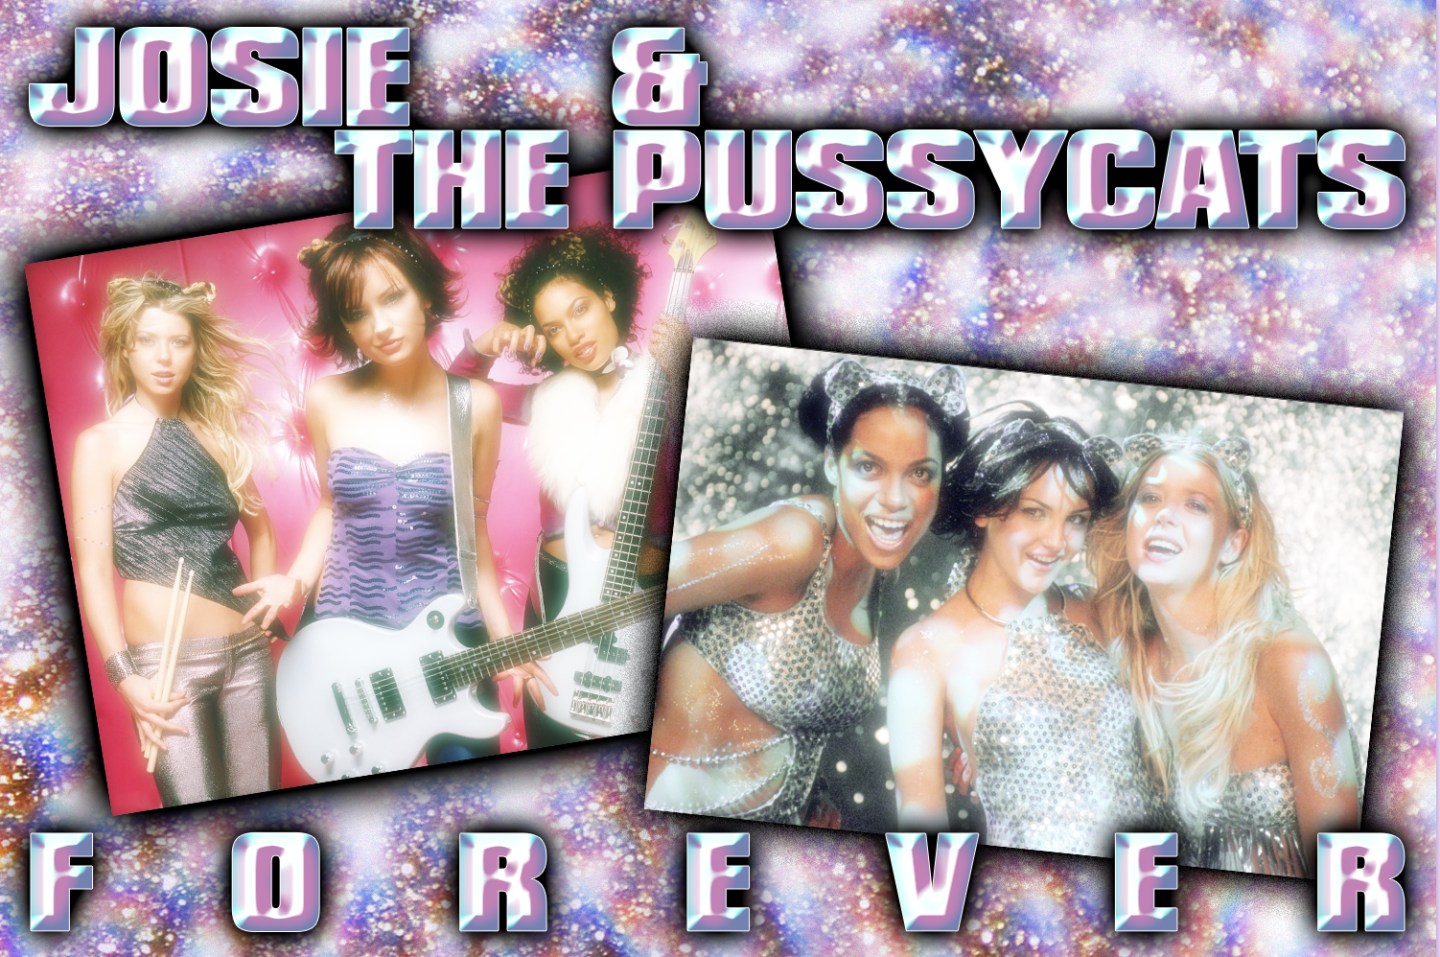 Josie and the Pussycats are the best fake rock band ever